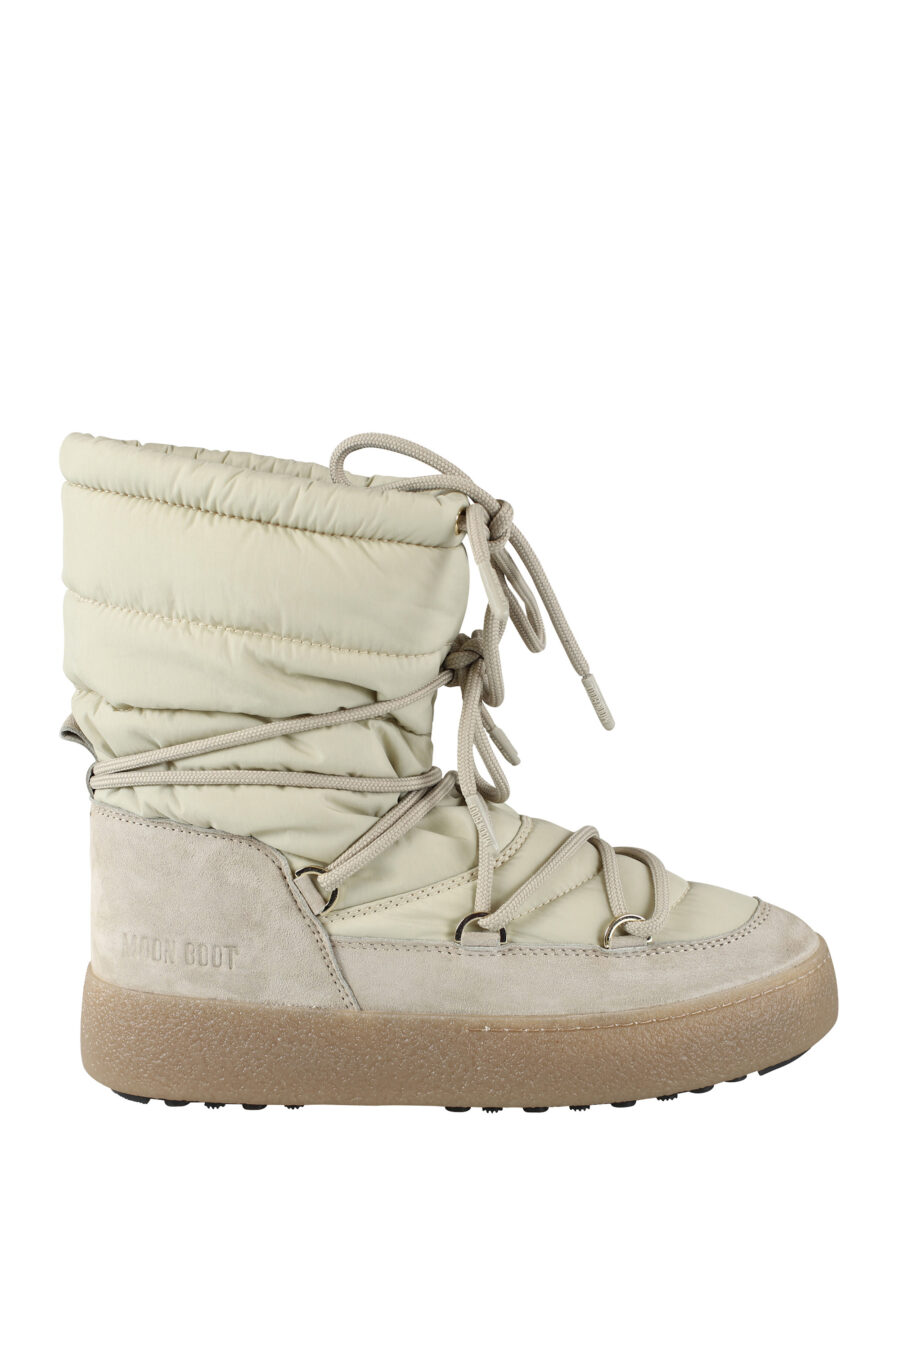 Sand coloured short snow boots with logo - IMG 9623